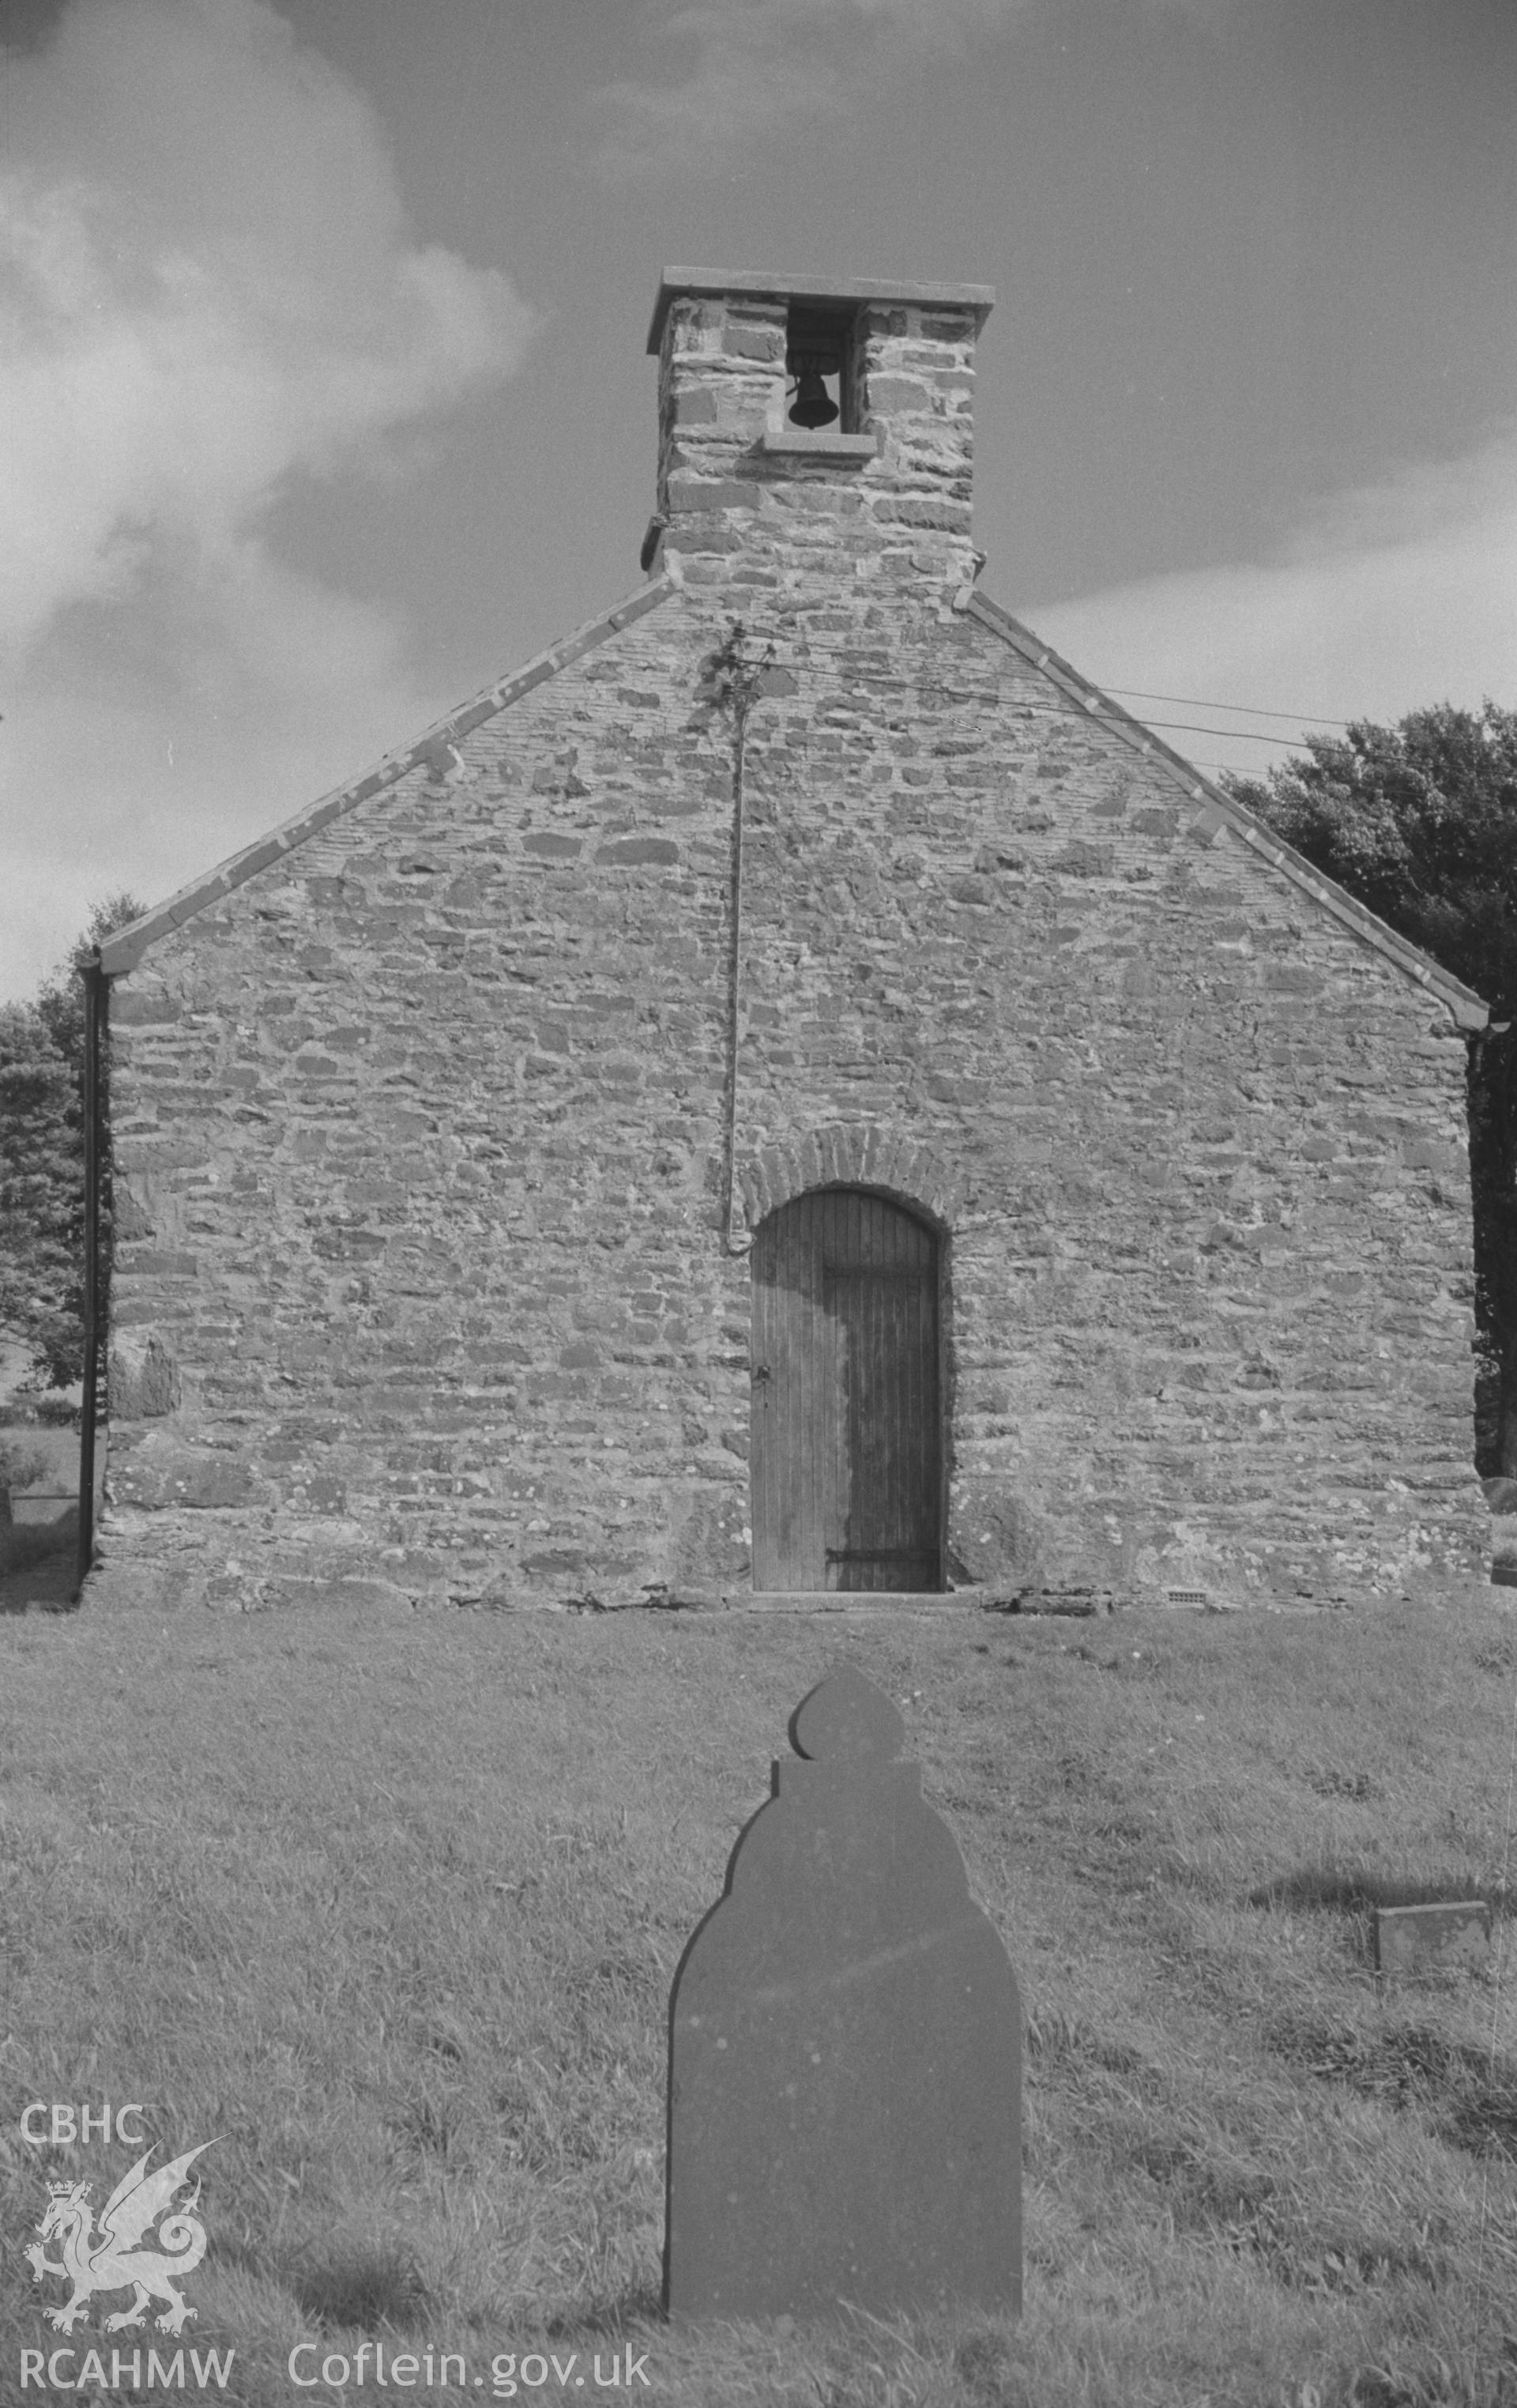 Digital copy of a black and white negative showing east front of St. Padarn's Church, Llanbadarn Odwyn, Llangeitho. Bell thought to date from c.1800. Photographed by Arthur O. Chater on 2nd September 1967 looking east from Grid Reference SN 634 605.